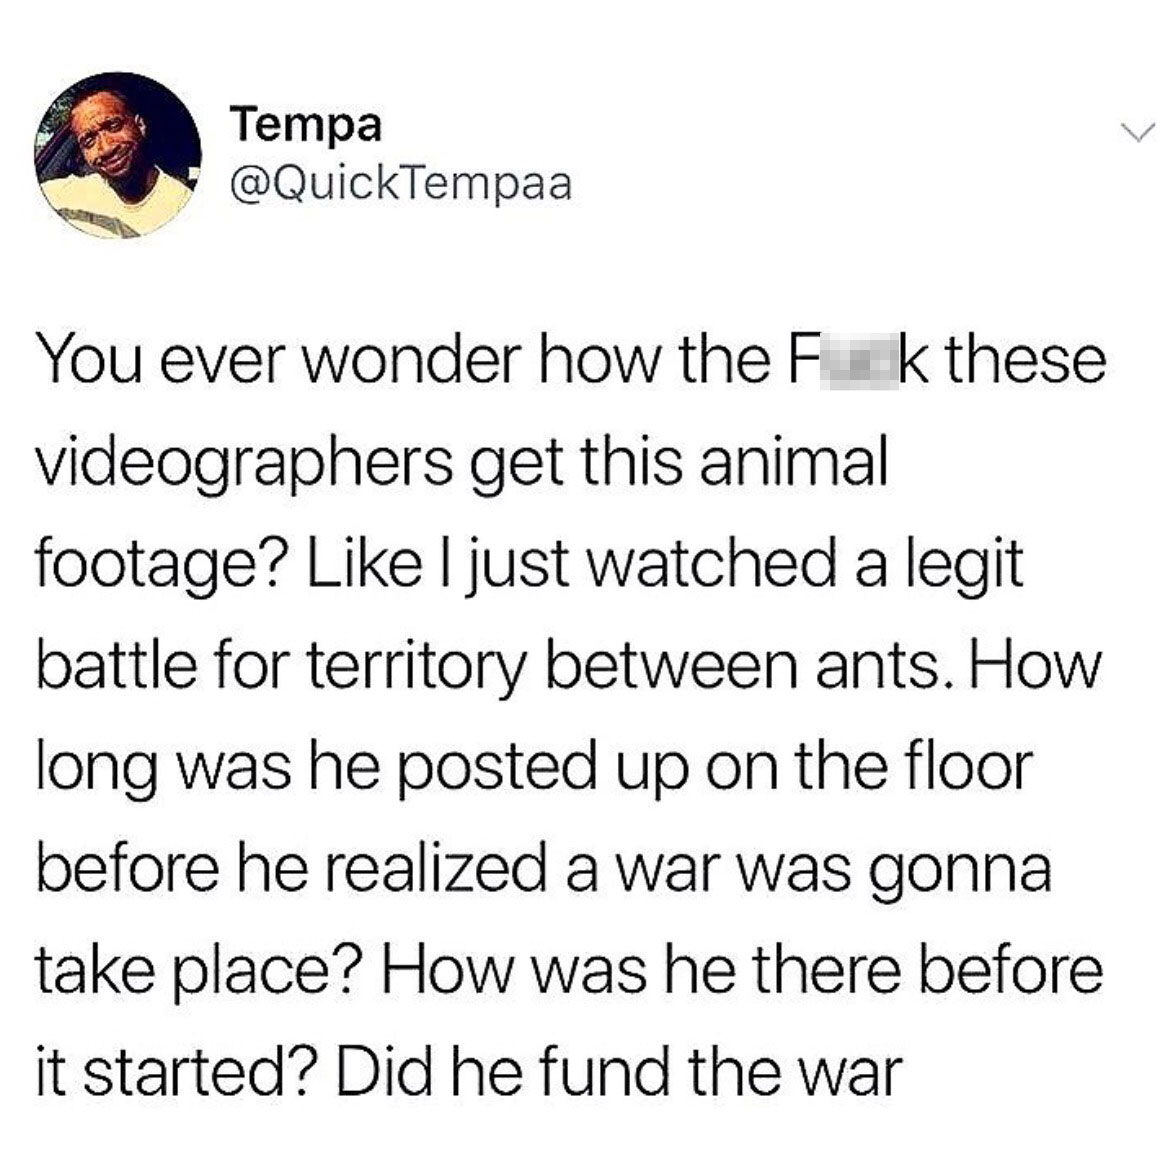 memes  - dank tweets - Tempa Tempa You ever wonder how the Fuk these videographers get this animal footage? I just watched a legit battle for territory between ants. How long was he posted up on the floor before he realized a war was gonna take place? How